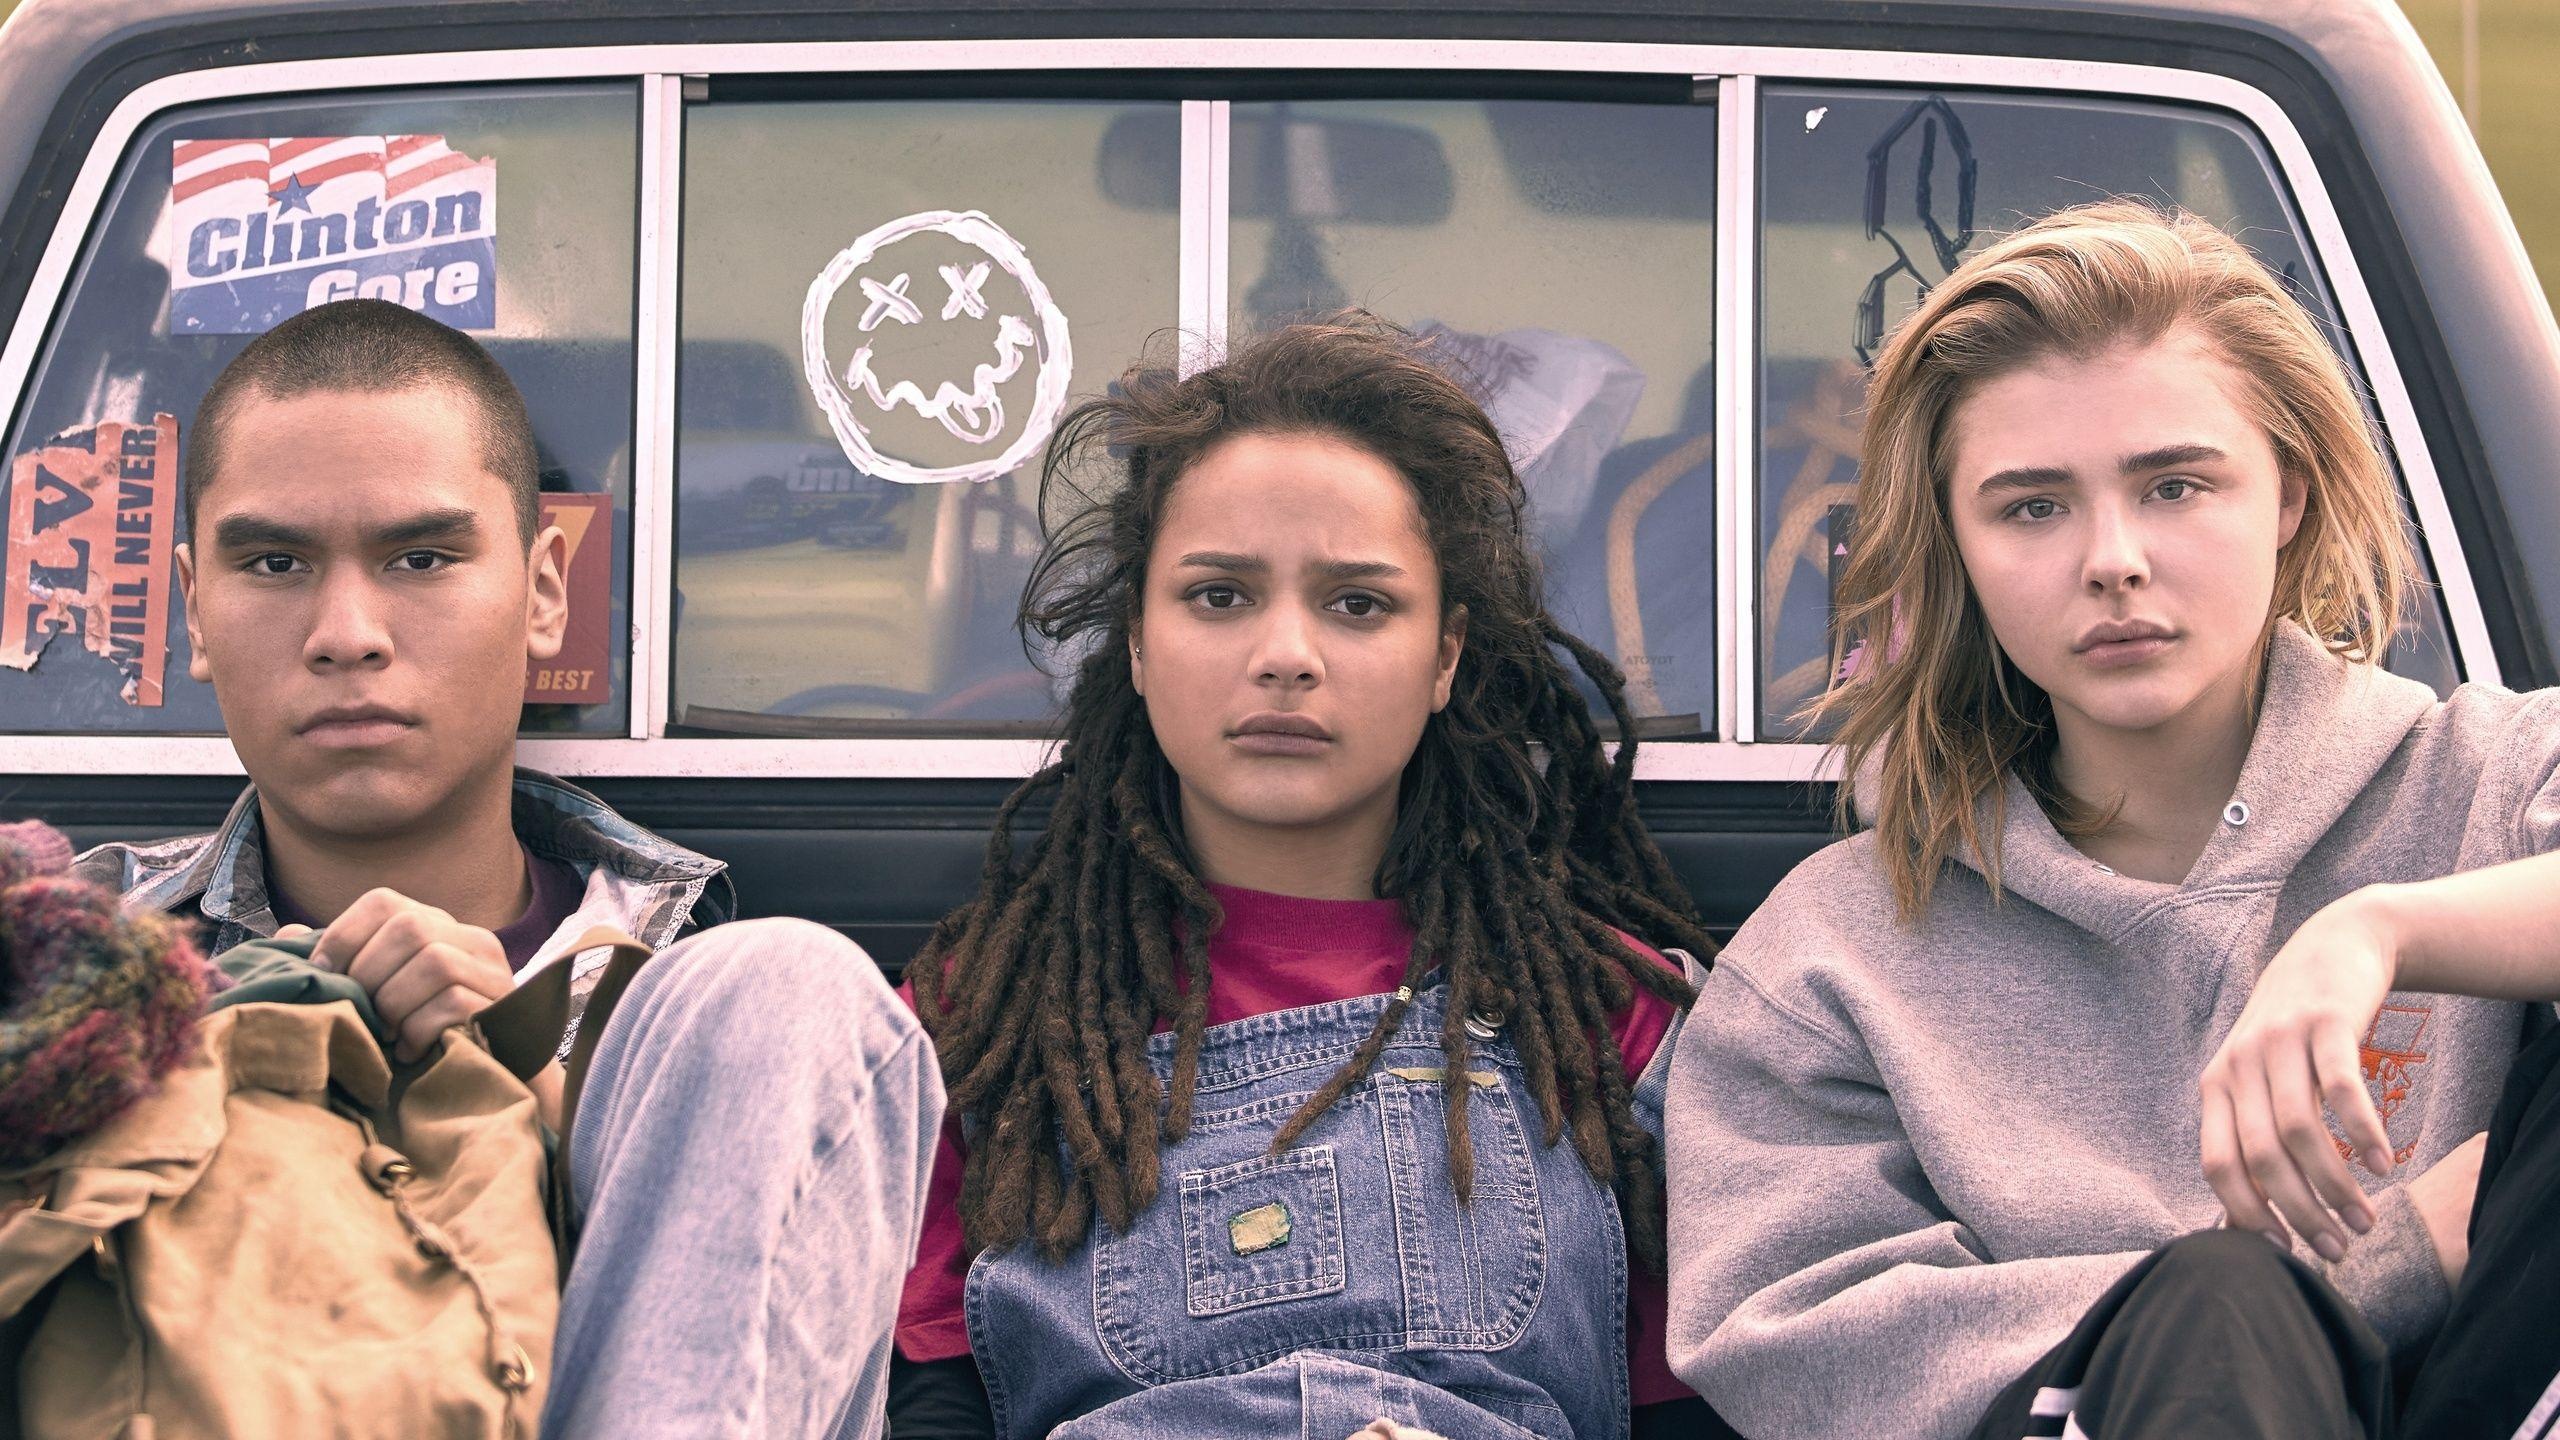 The Miseducation of Cameron Post, Movie wallpapers, 2560x1440 HD Desktop